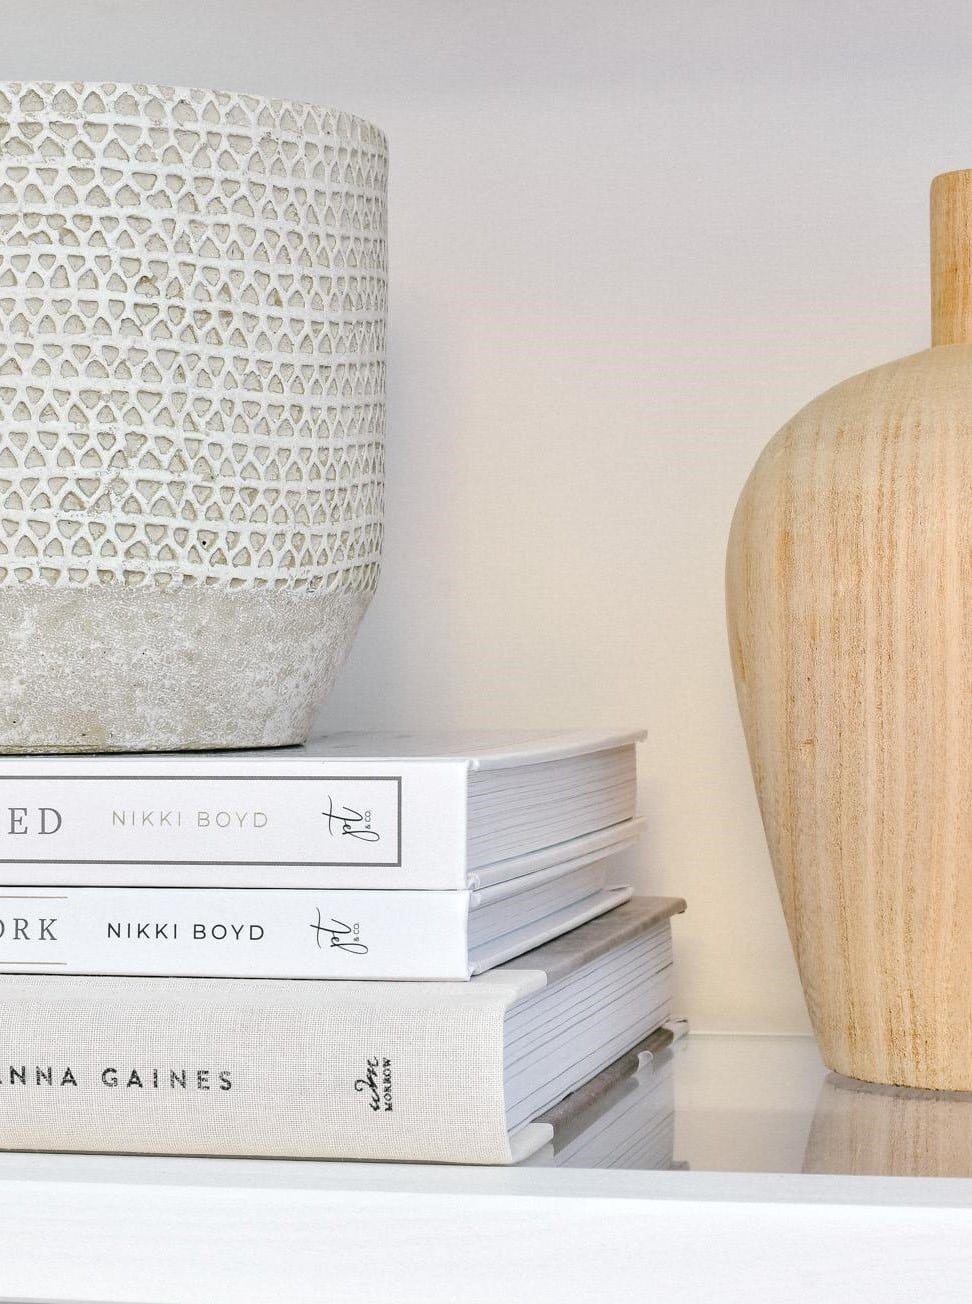 15 Beautiful Coffee Table Books to Enhance Your Home Decor